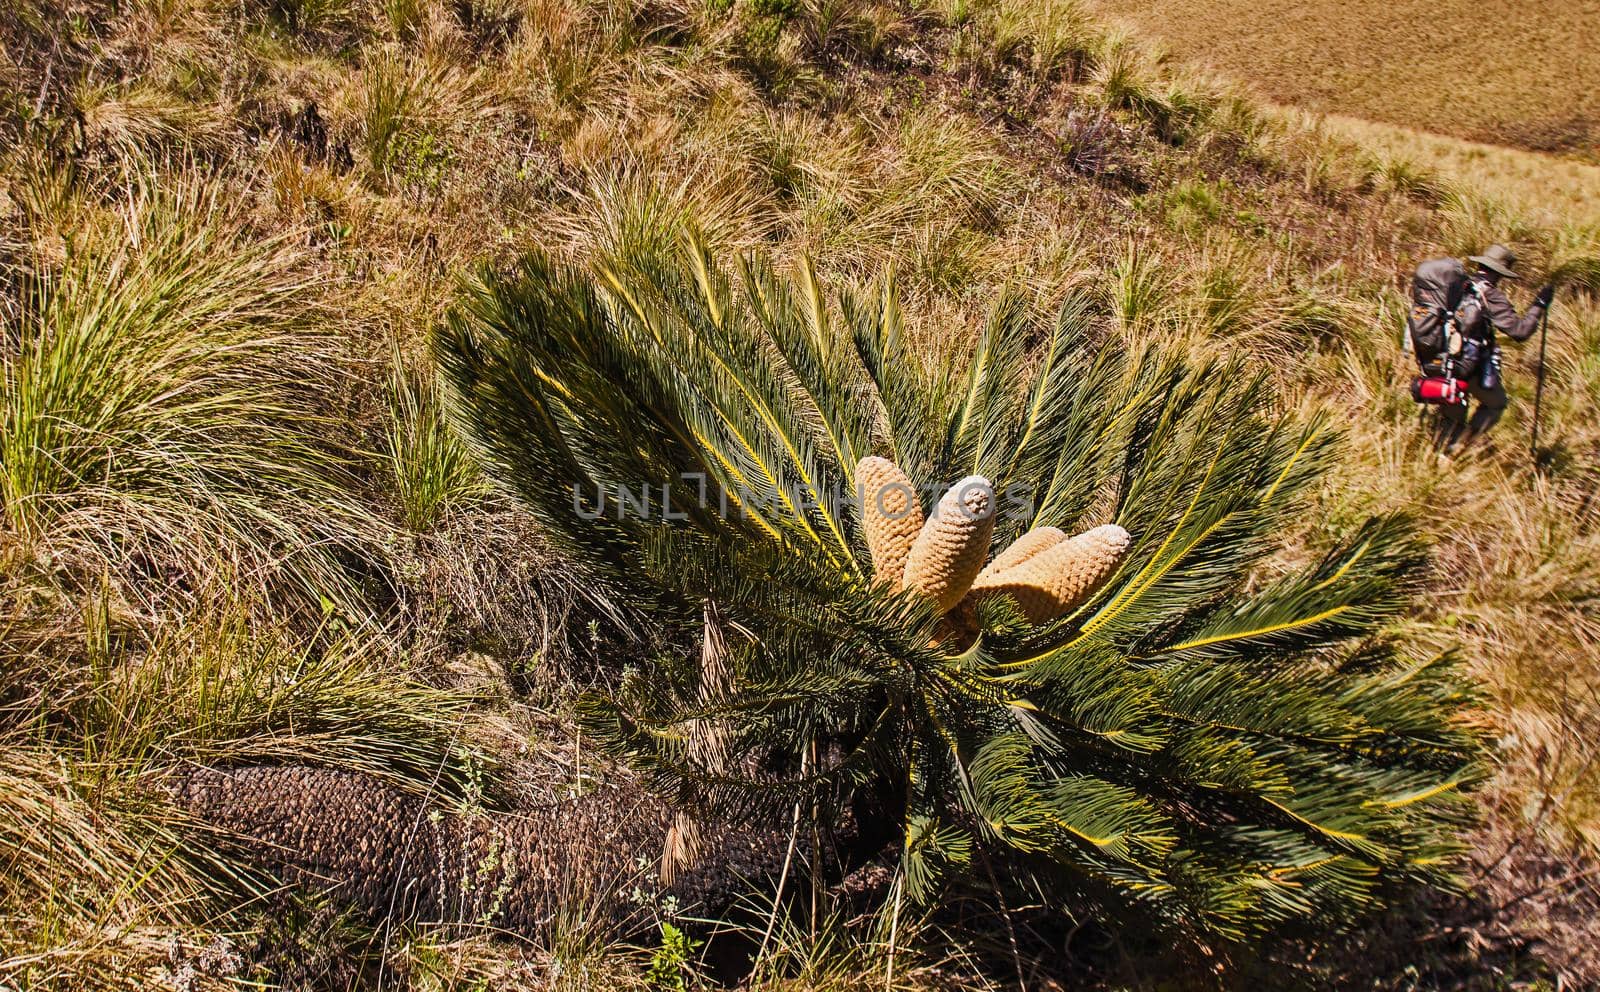 The White-haired Cycad (Encephalartos friderici-guilielmi) is endemic to the Drakensberg range in South Africa